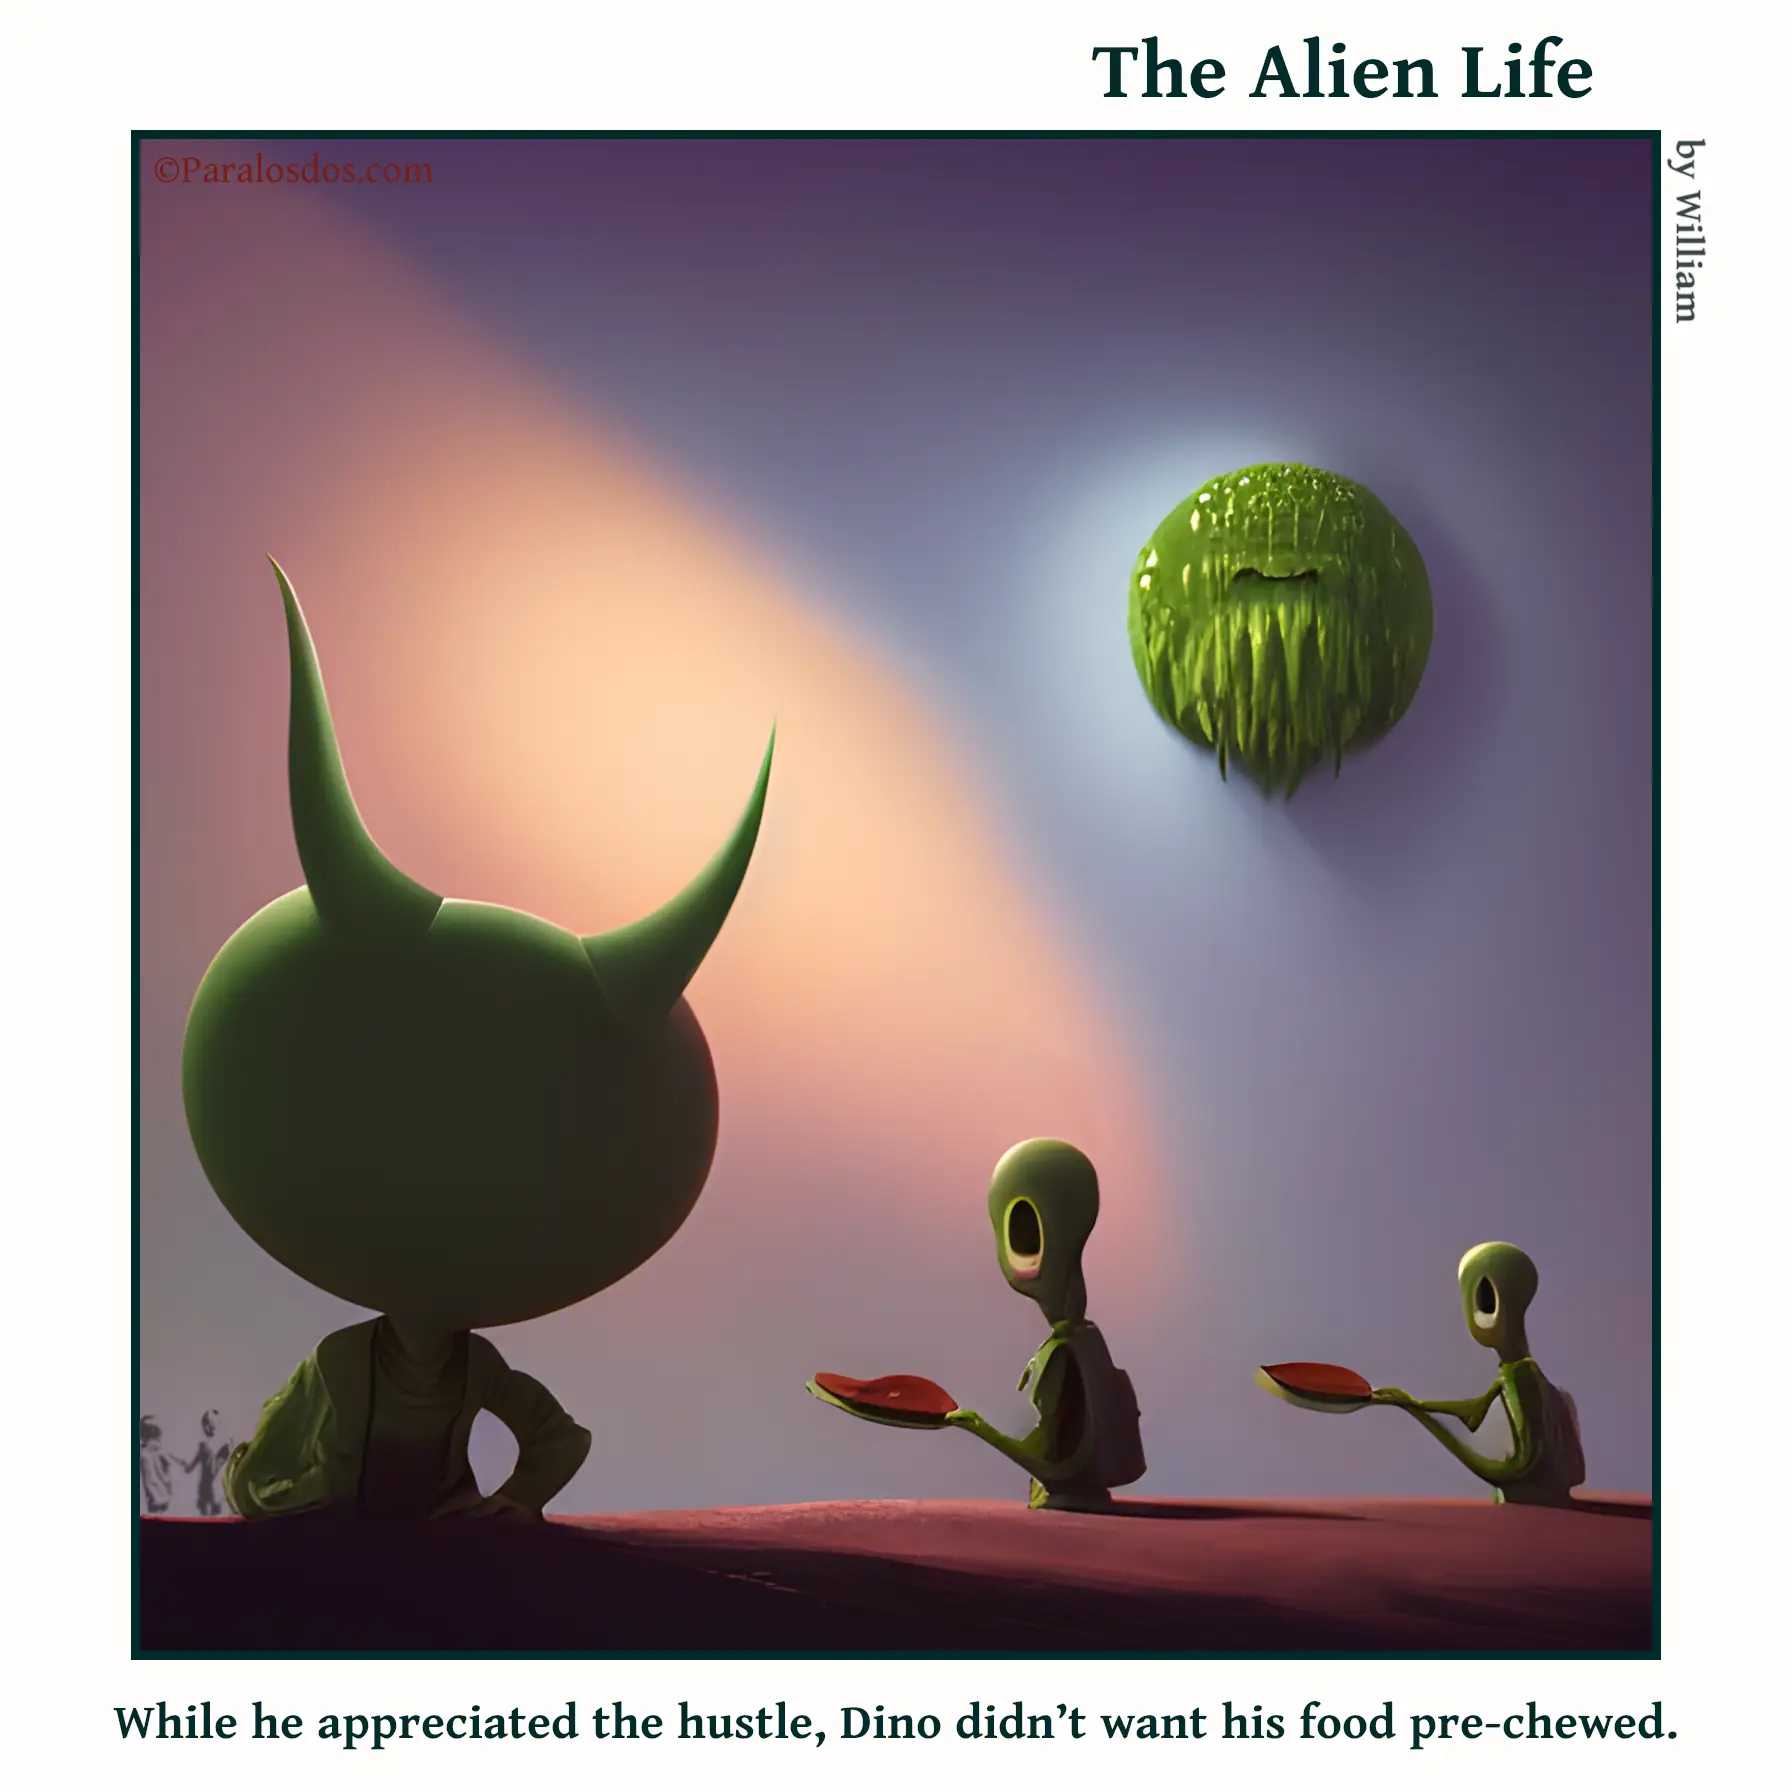 The Alien Life, one panel Comic. An alien is siting at a restaurant table, two waiters are approaching him with food that looks like it has already been chewed. The caption reads: While he appreciated the hustle, Dino didn’t want his food pre-chewed.